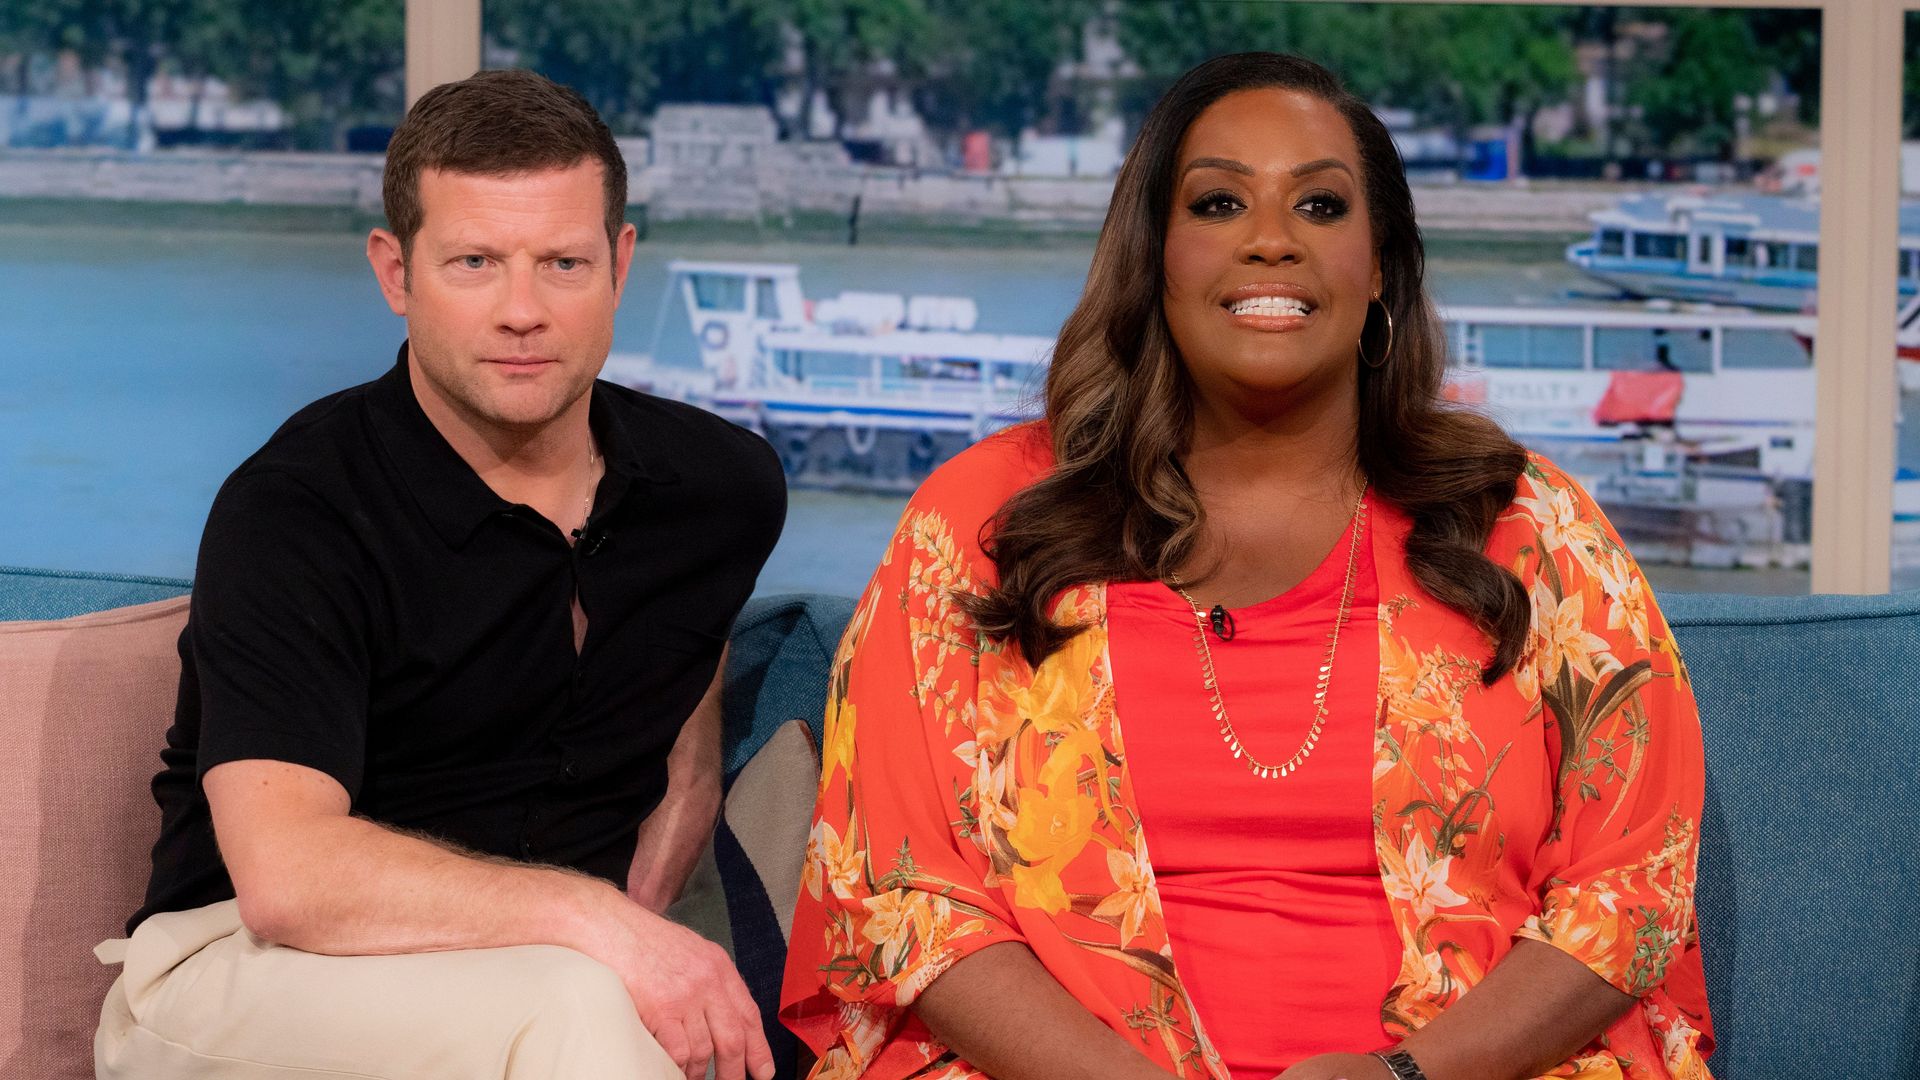 Dermot O'Leary, Alison Hammond on
'This Morning'